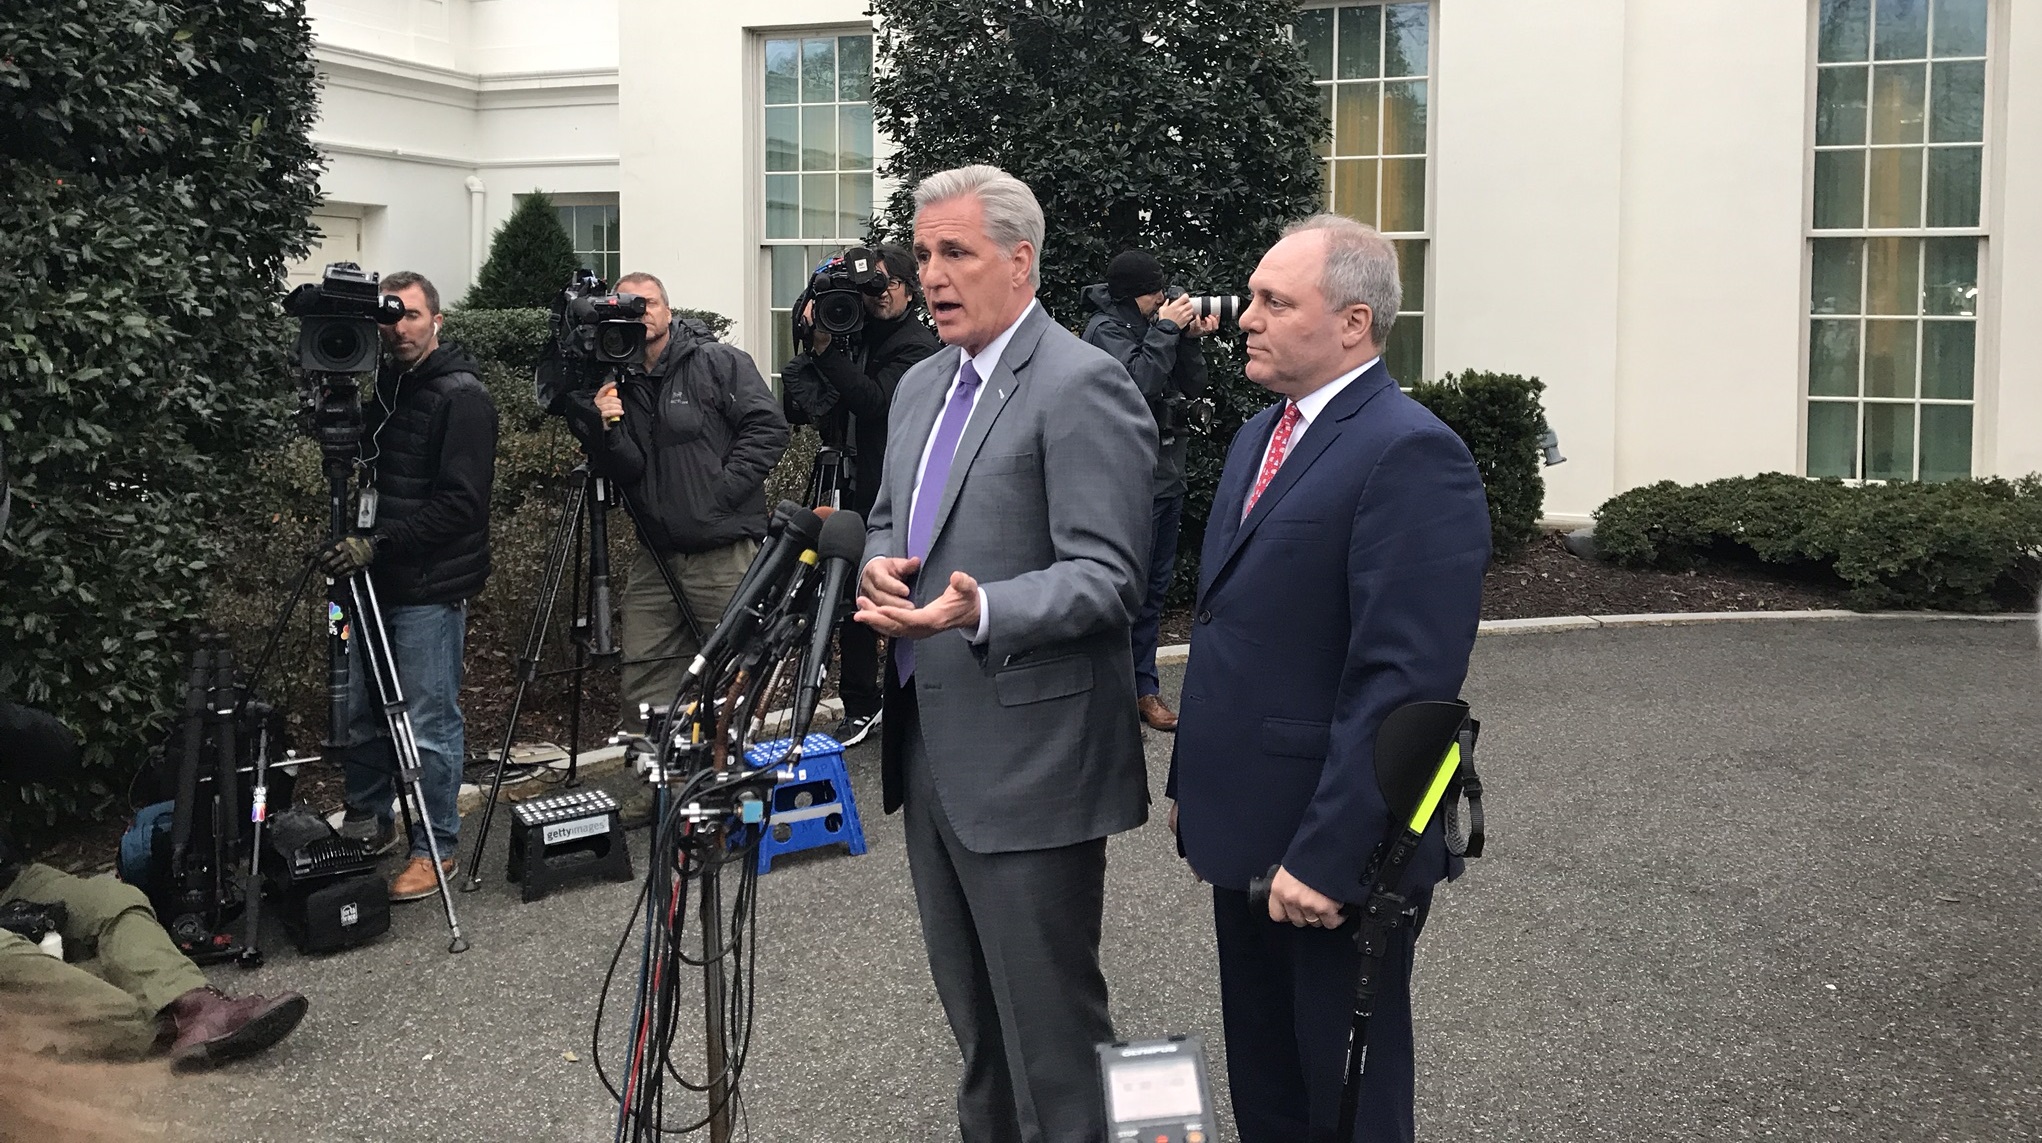 Reps Kevin McCarthy and Steve Scalise talk to media after a White House briefing in Washington